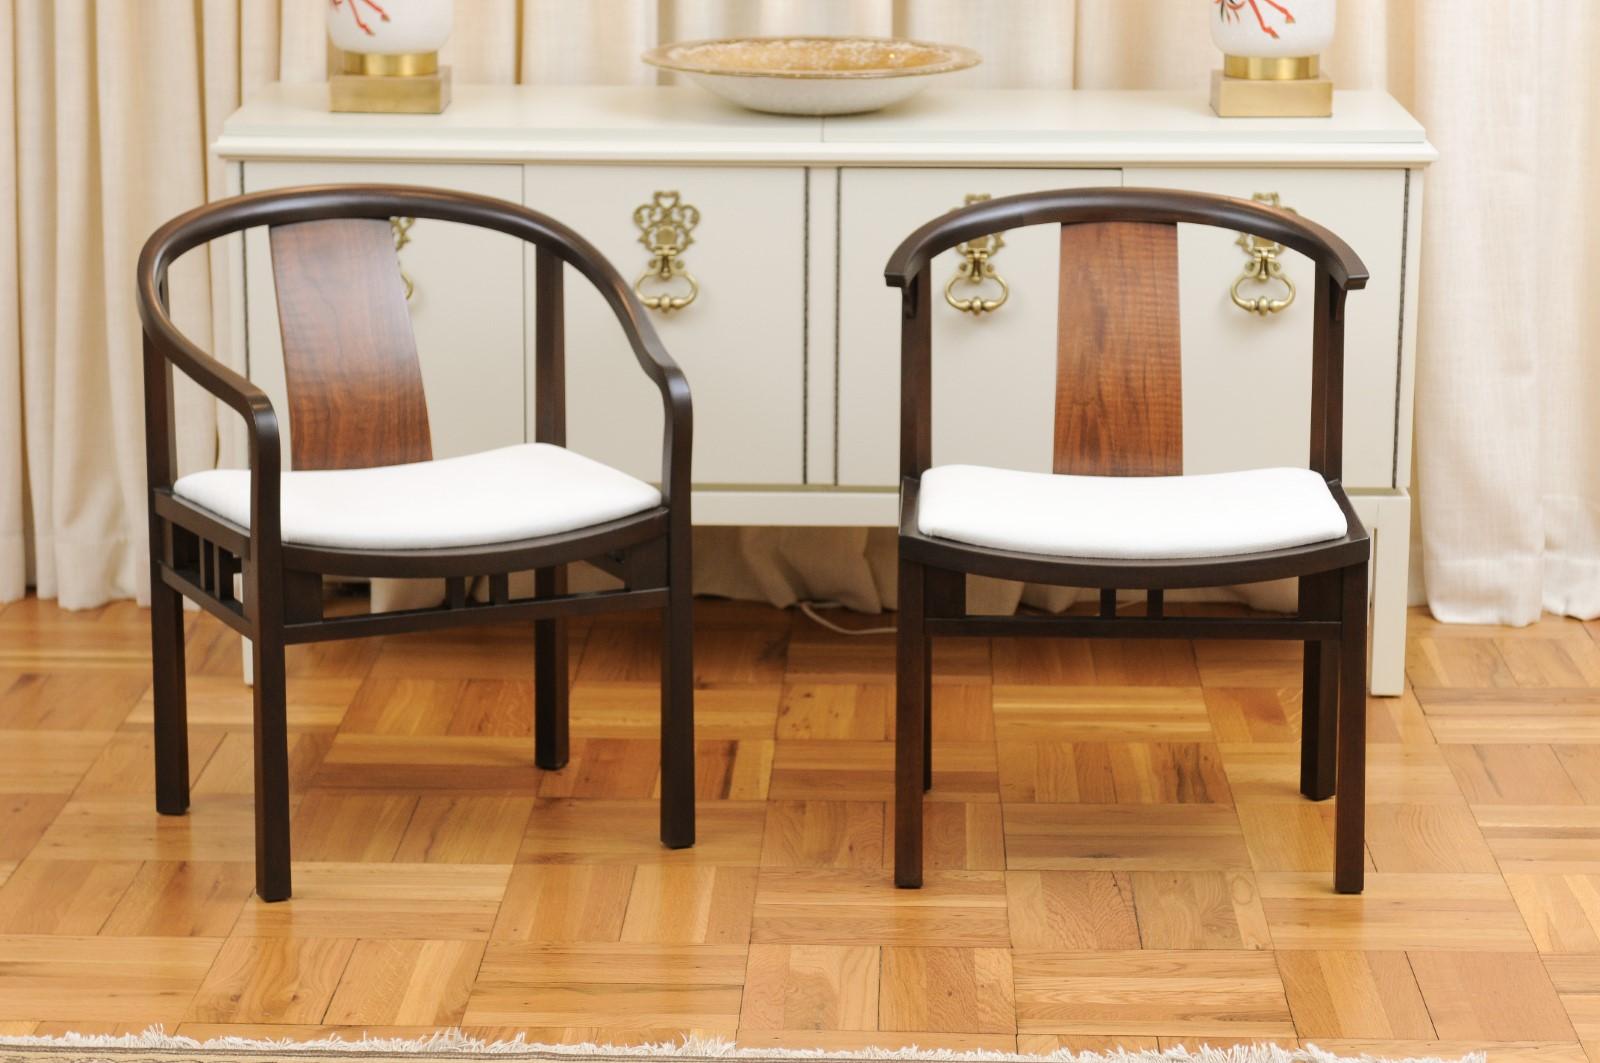 These magnificent dining chairs are shipped as professionally photographed and described in the listing narrative: Meticulously professionally restored and installation ready. This large set of rare examples is unique on the World market. Seats may